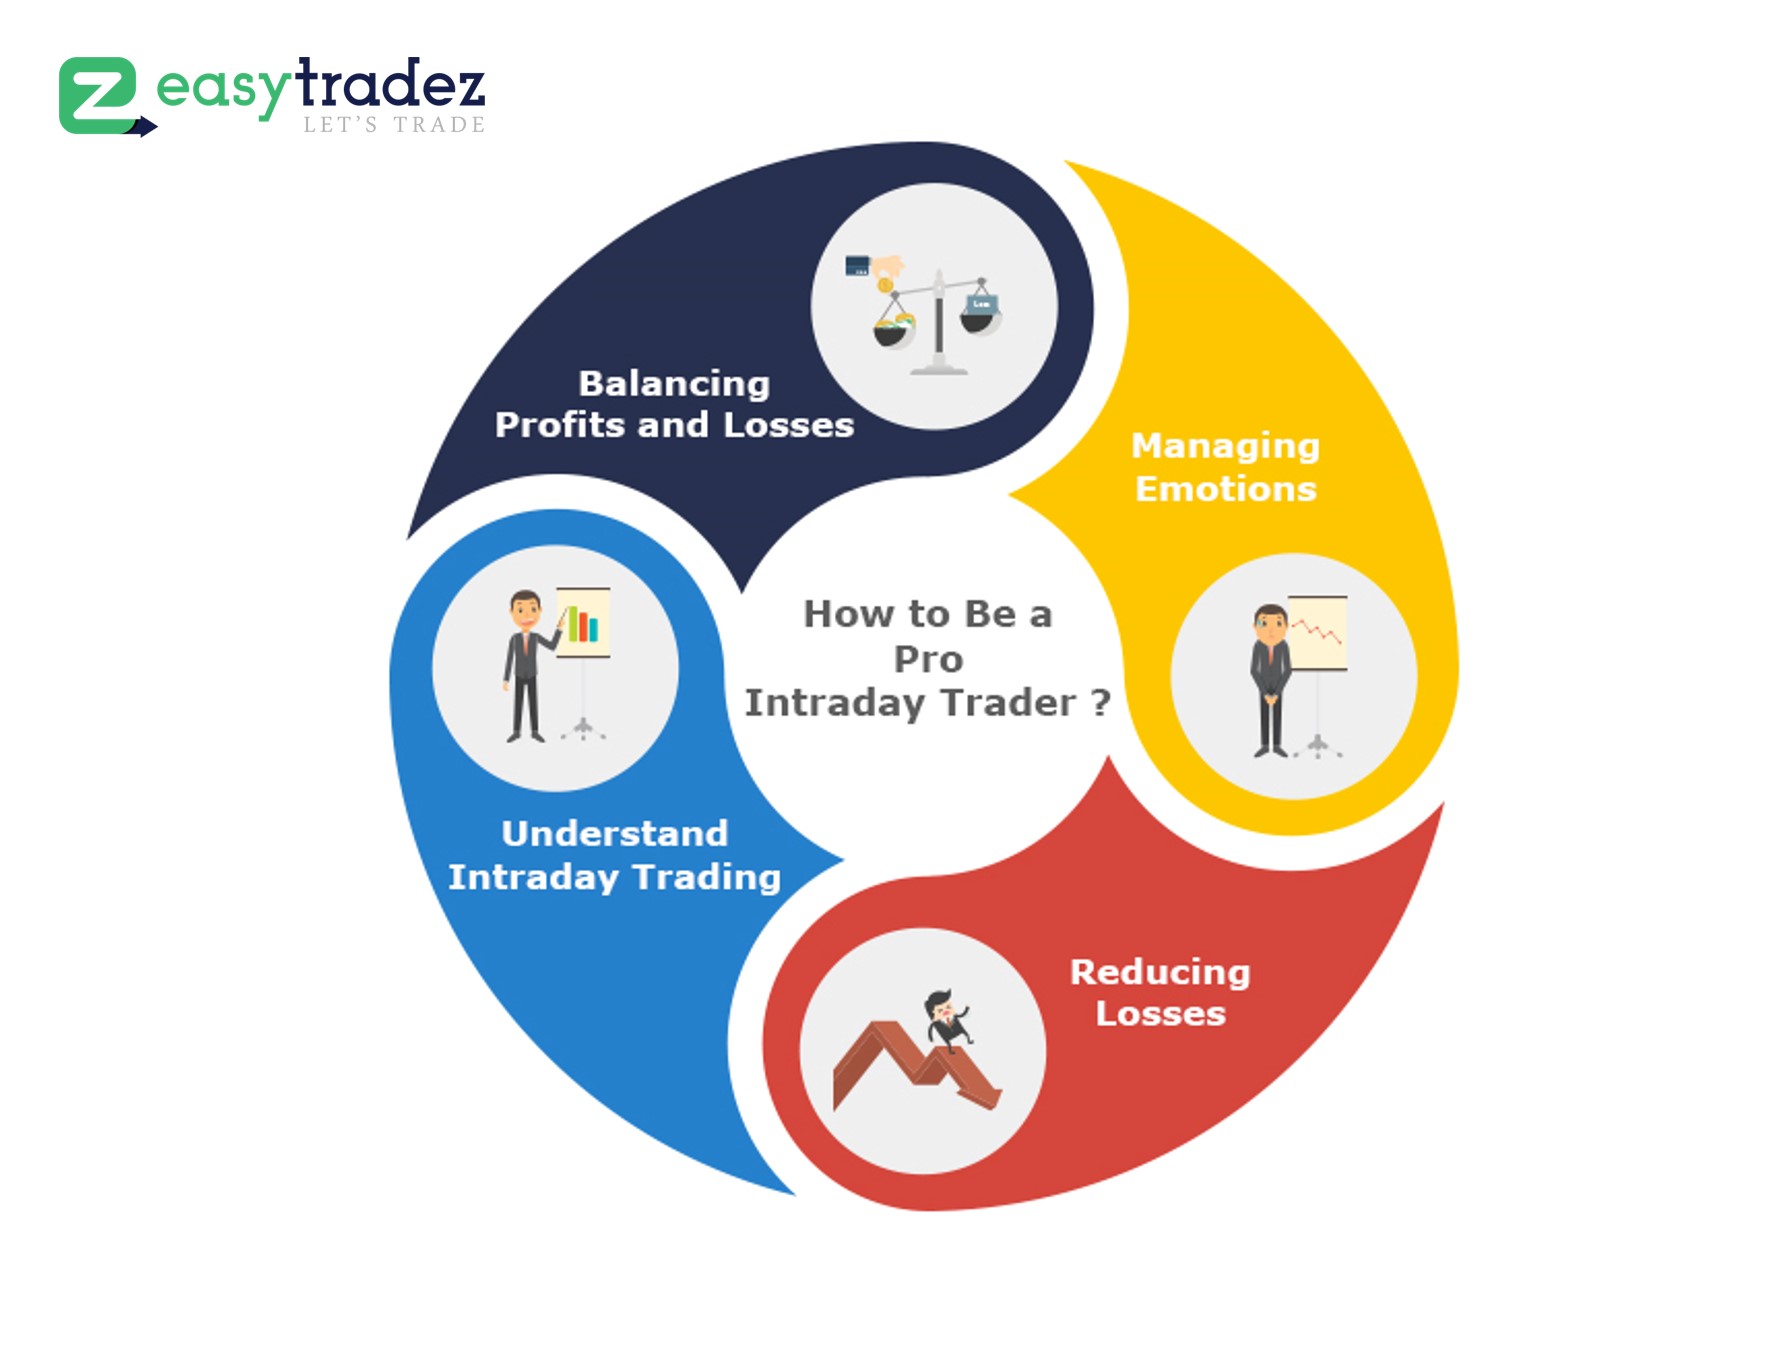 How to Be a Pro Intraday Trader